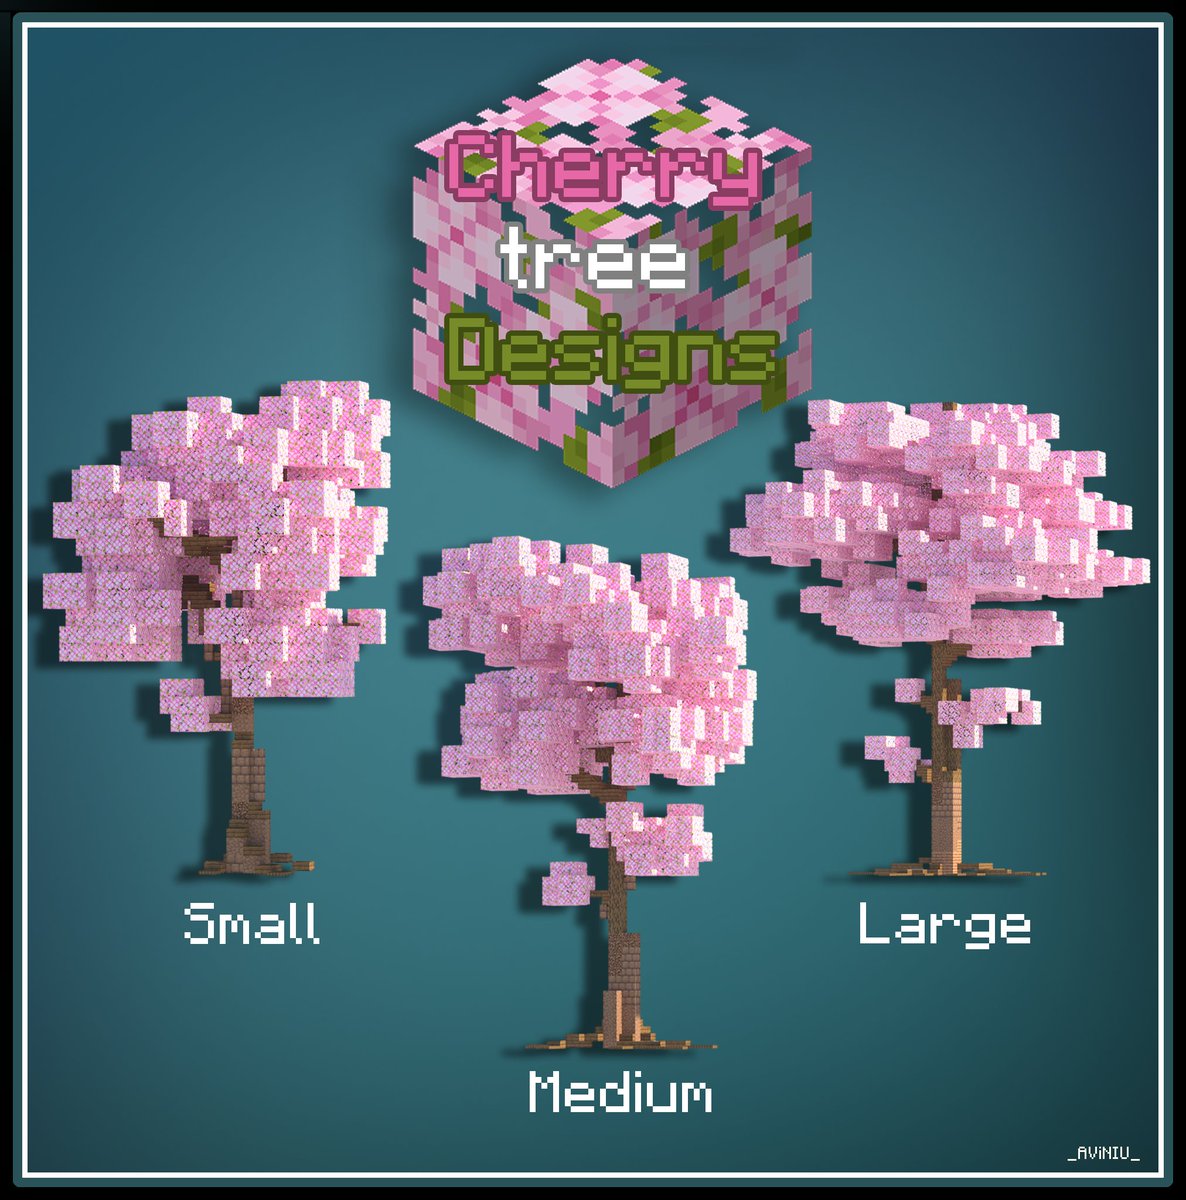 Some tree designs HEAVILY inspired by @Junopii_ but i wanted to build some trees after a long time and share it here #Minecraft #Minecraftbuilds #minecraft建築コミュ